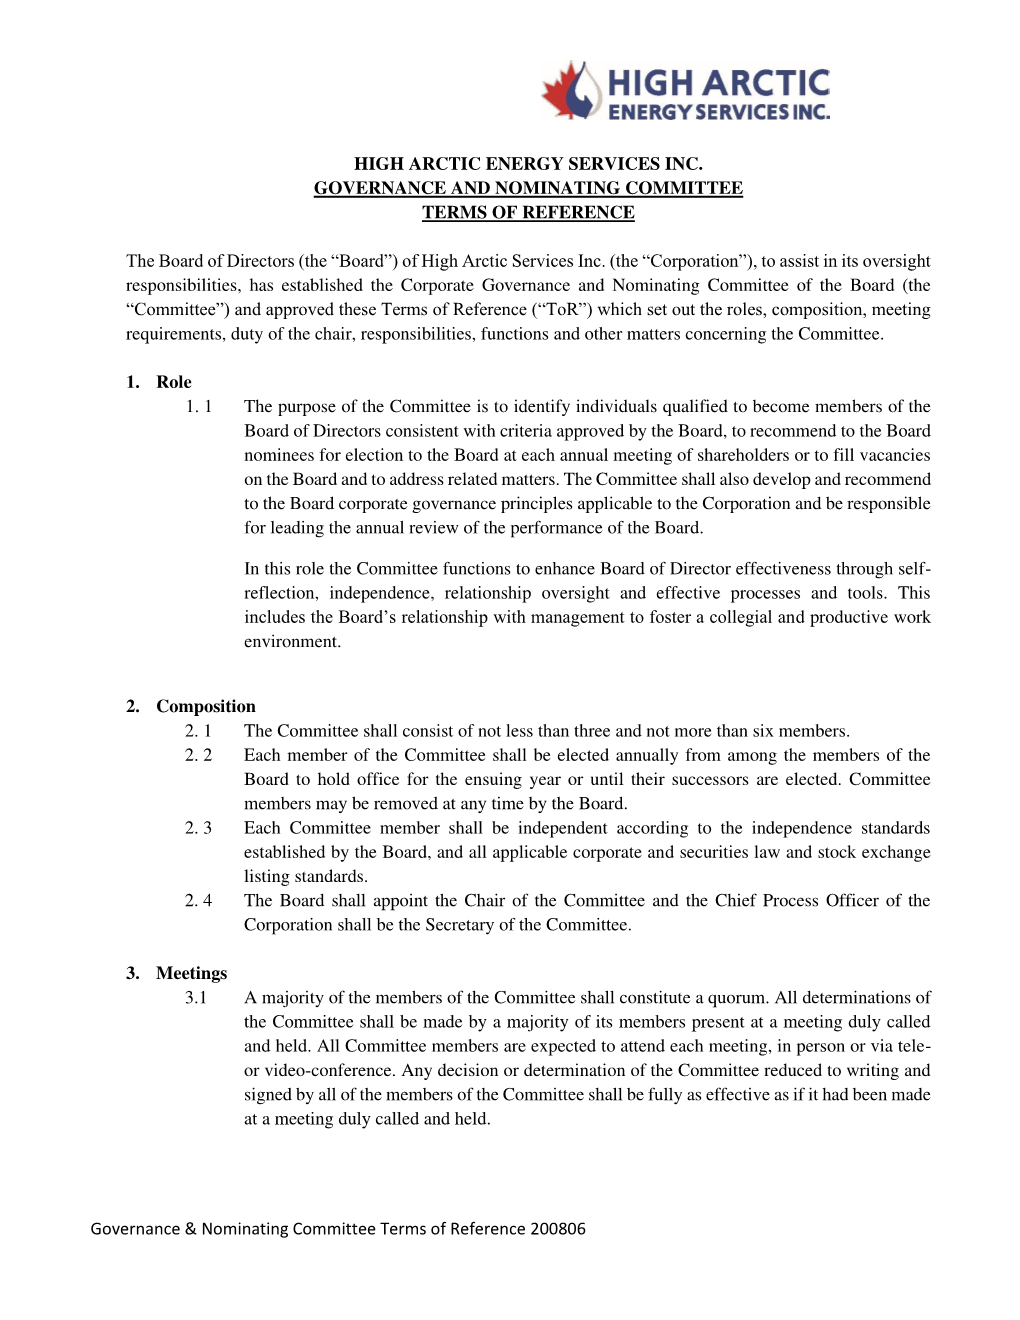 Governance and Nominating Committee Terms of Reference